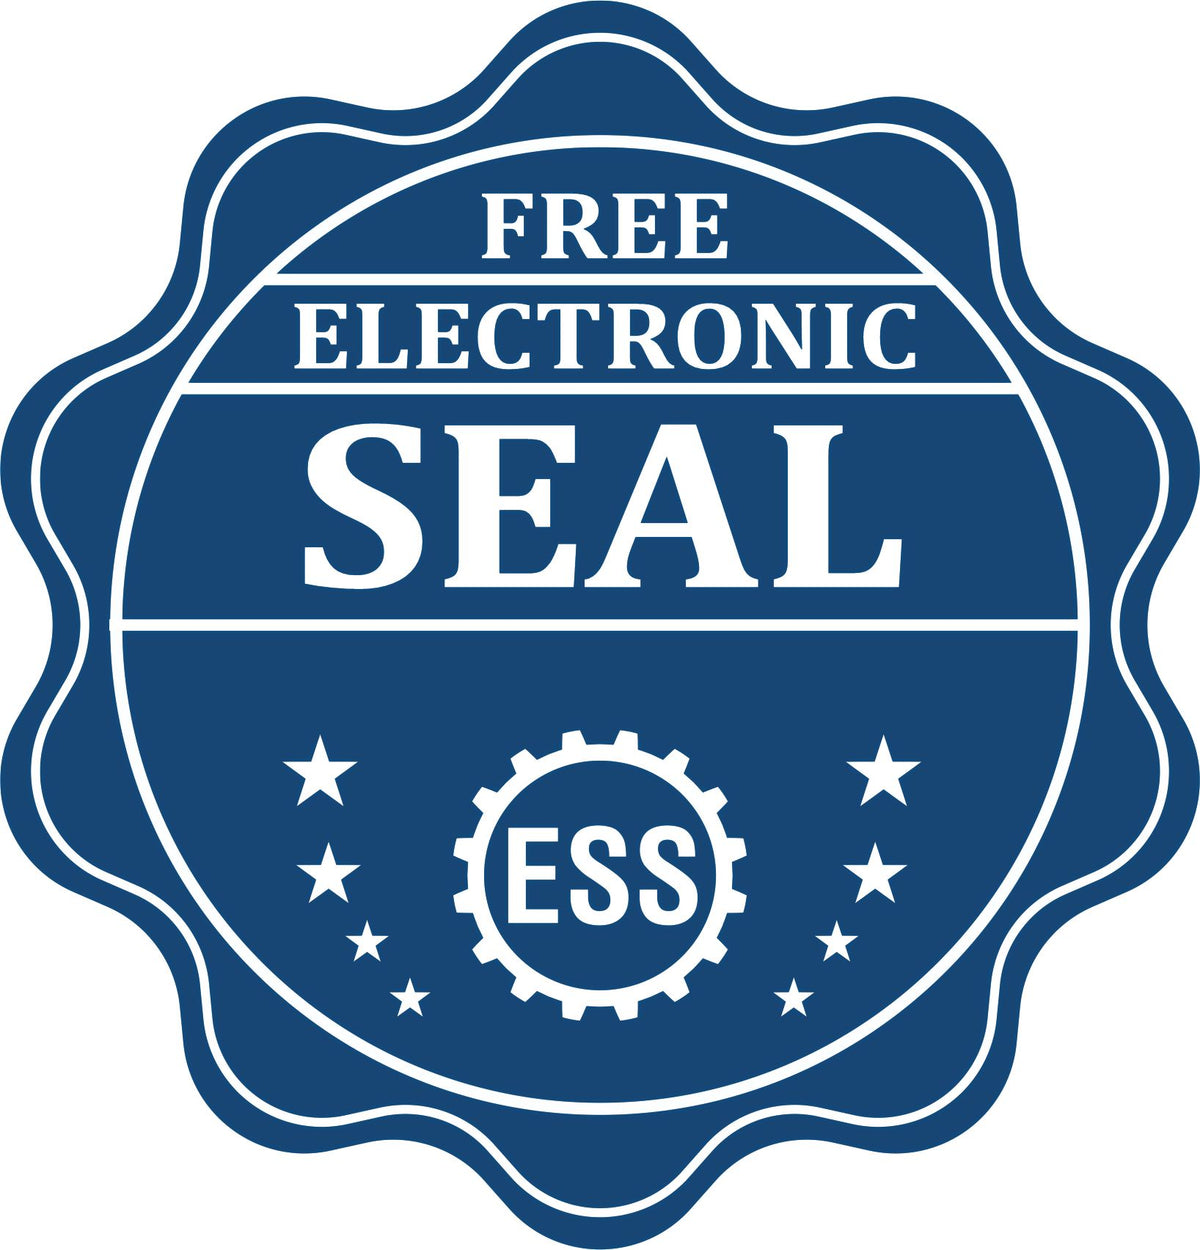 A badge showing a free electronic seal for the Gift Alaska Land Surveyor Seal with stars and the ESS gear on the emblem.